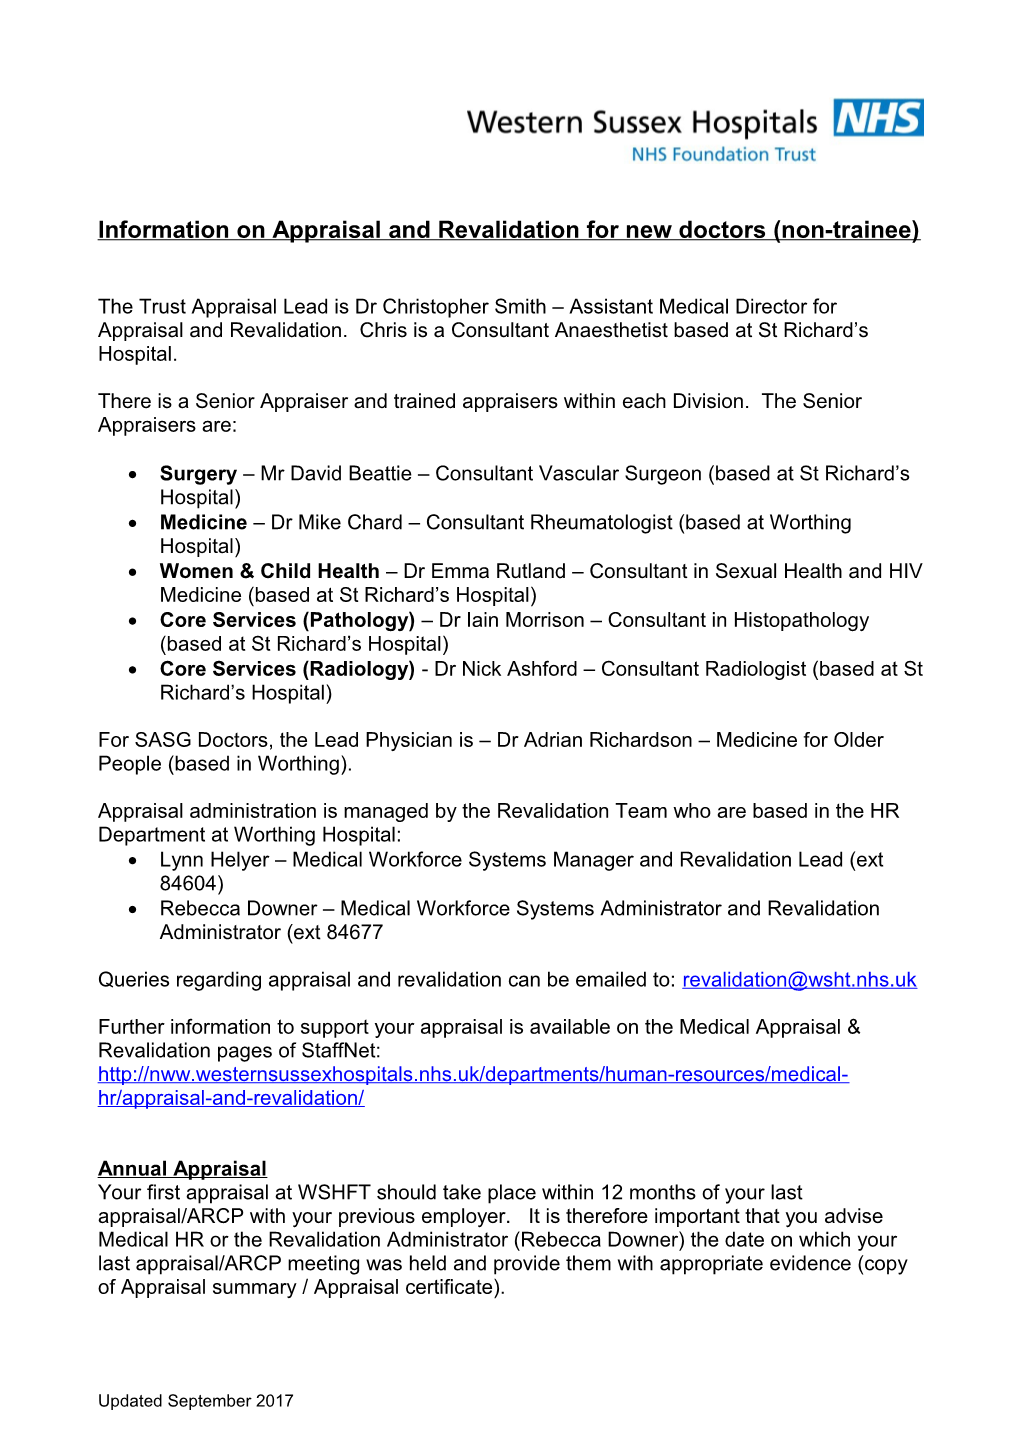 Information on Appraisal and Revalidation for New Doctors (Non-Trainee)